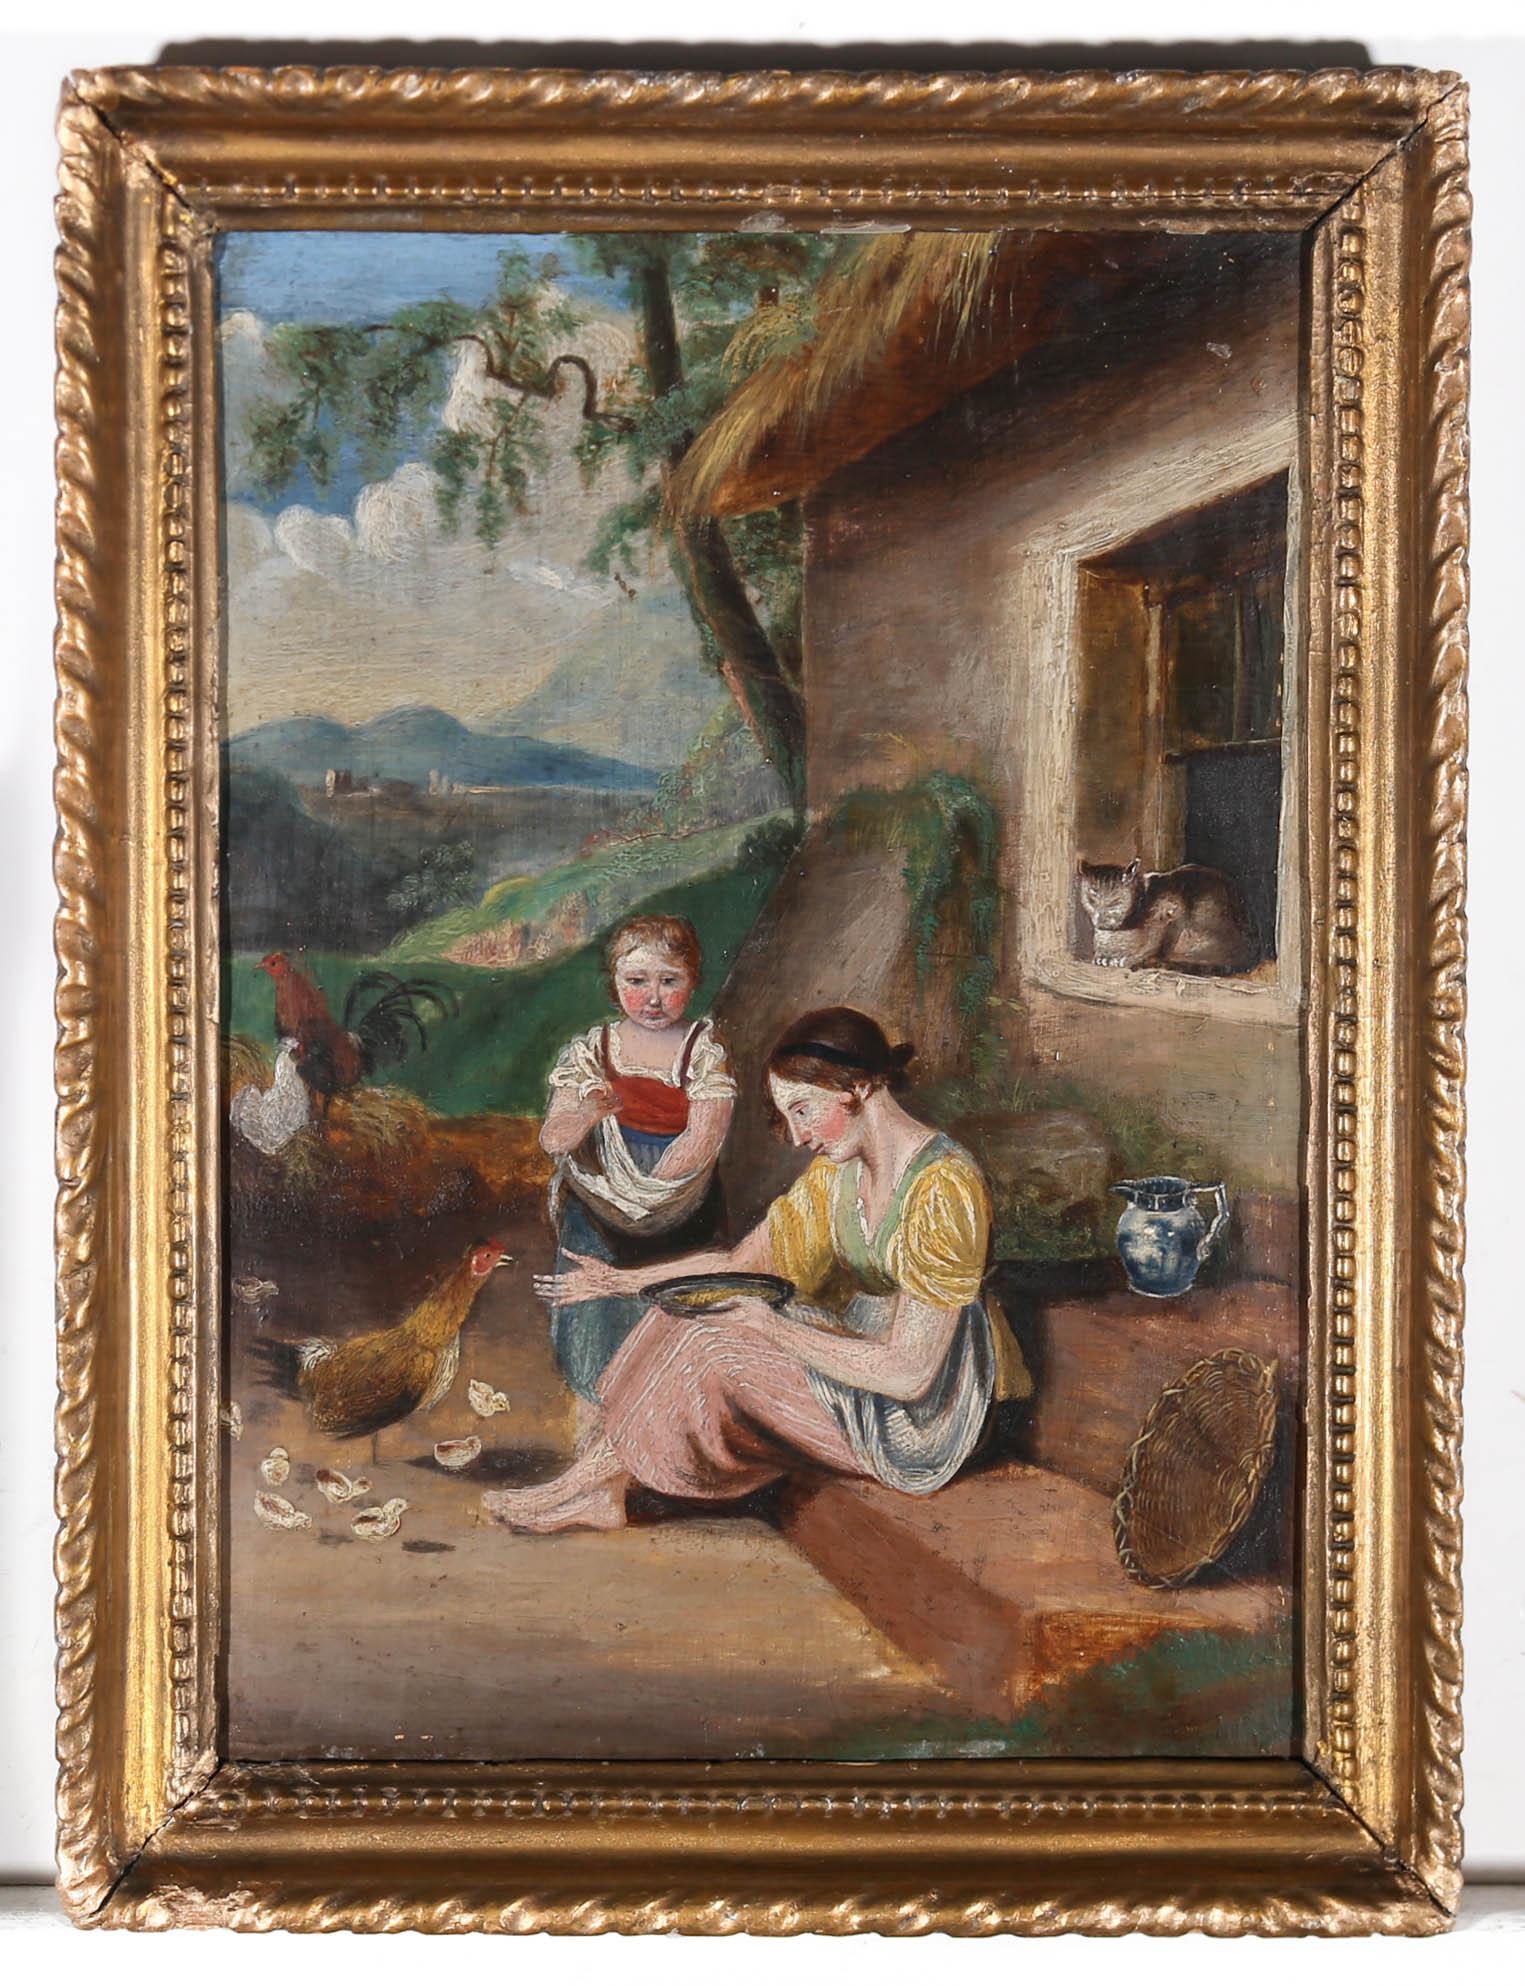 A charming 19th Century naive style scene in oil, showing a young child and her older sister feeding the chickens outside their rustic farm cottage. A cat dozes in the window and a blue and white china pitcher and wicker basket add domestic touches